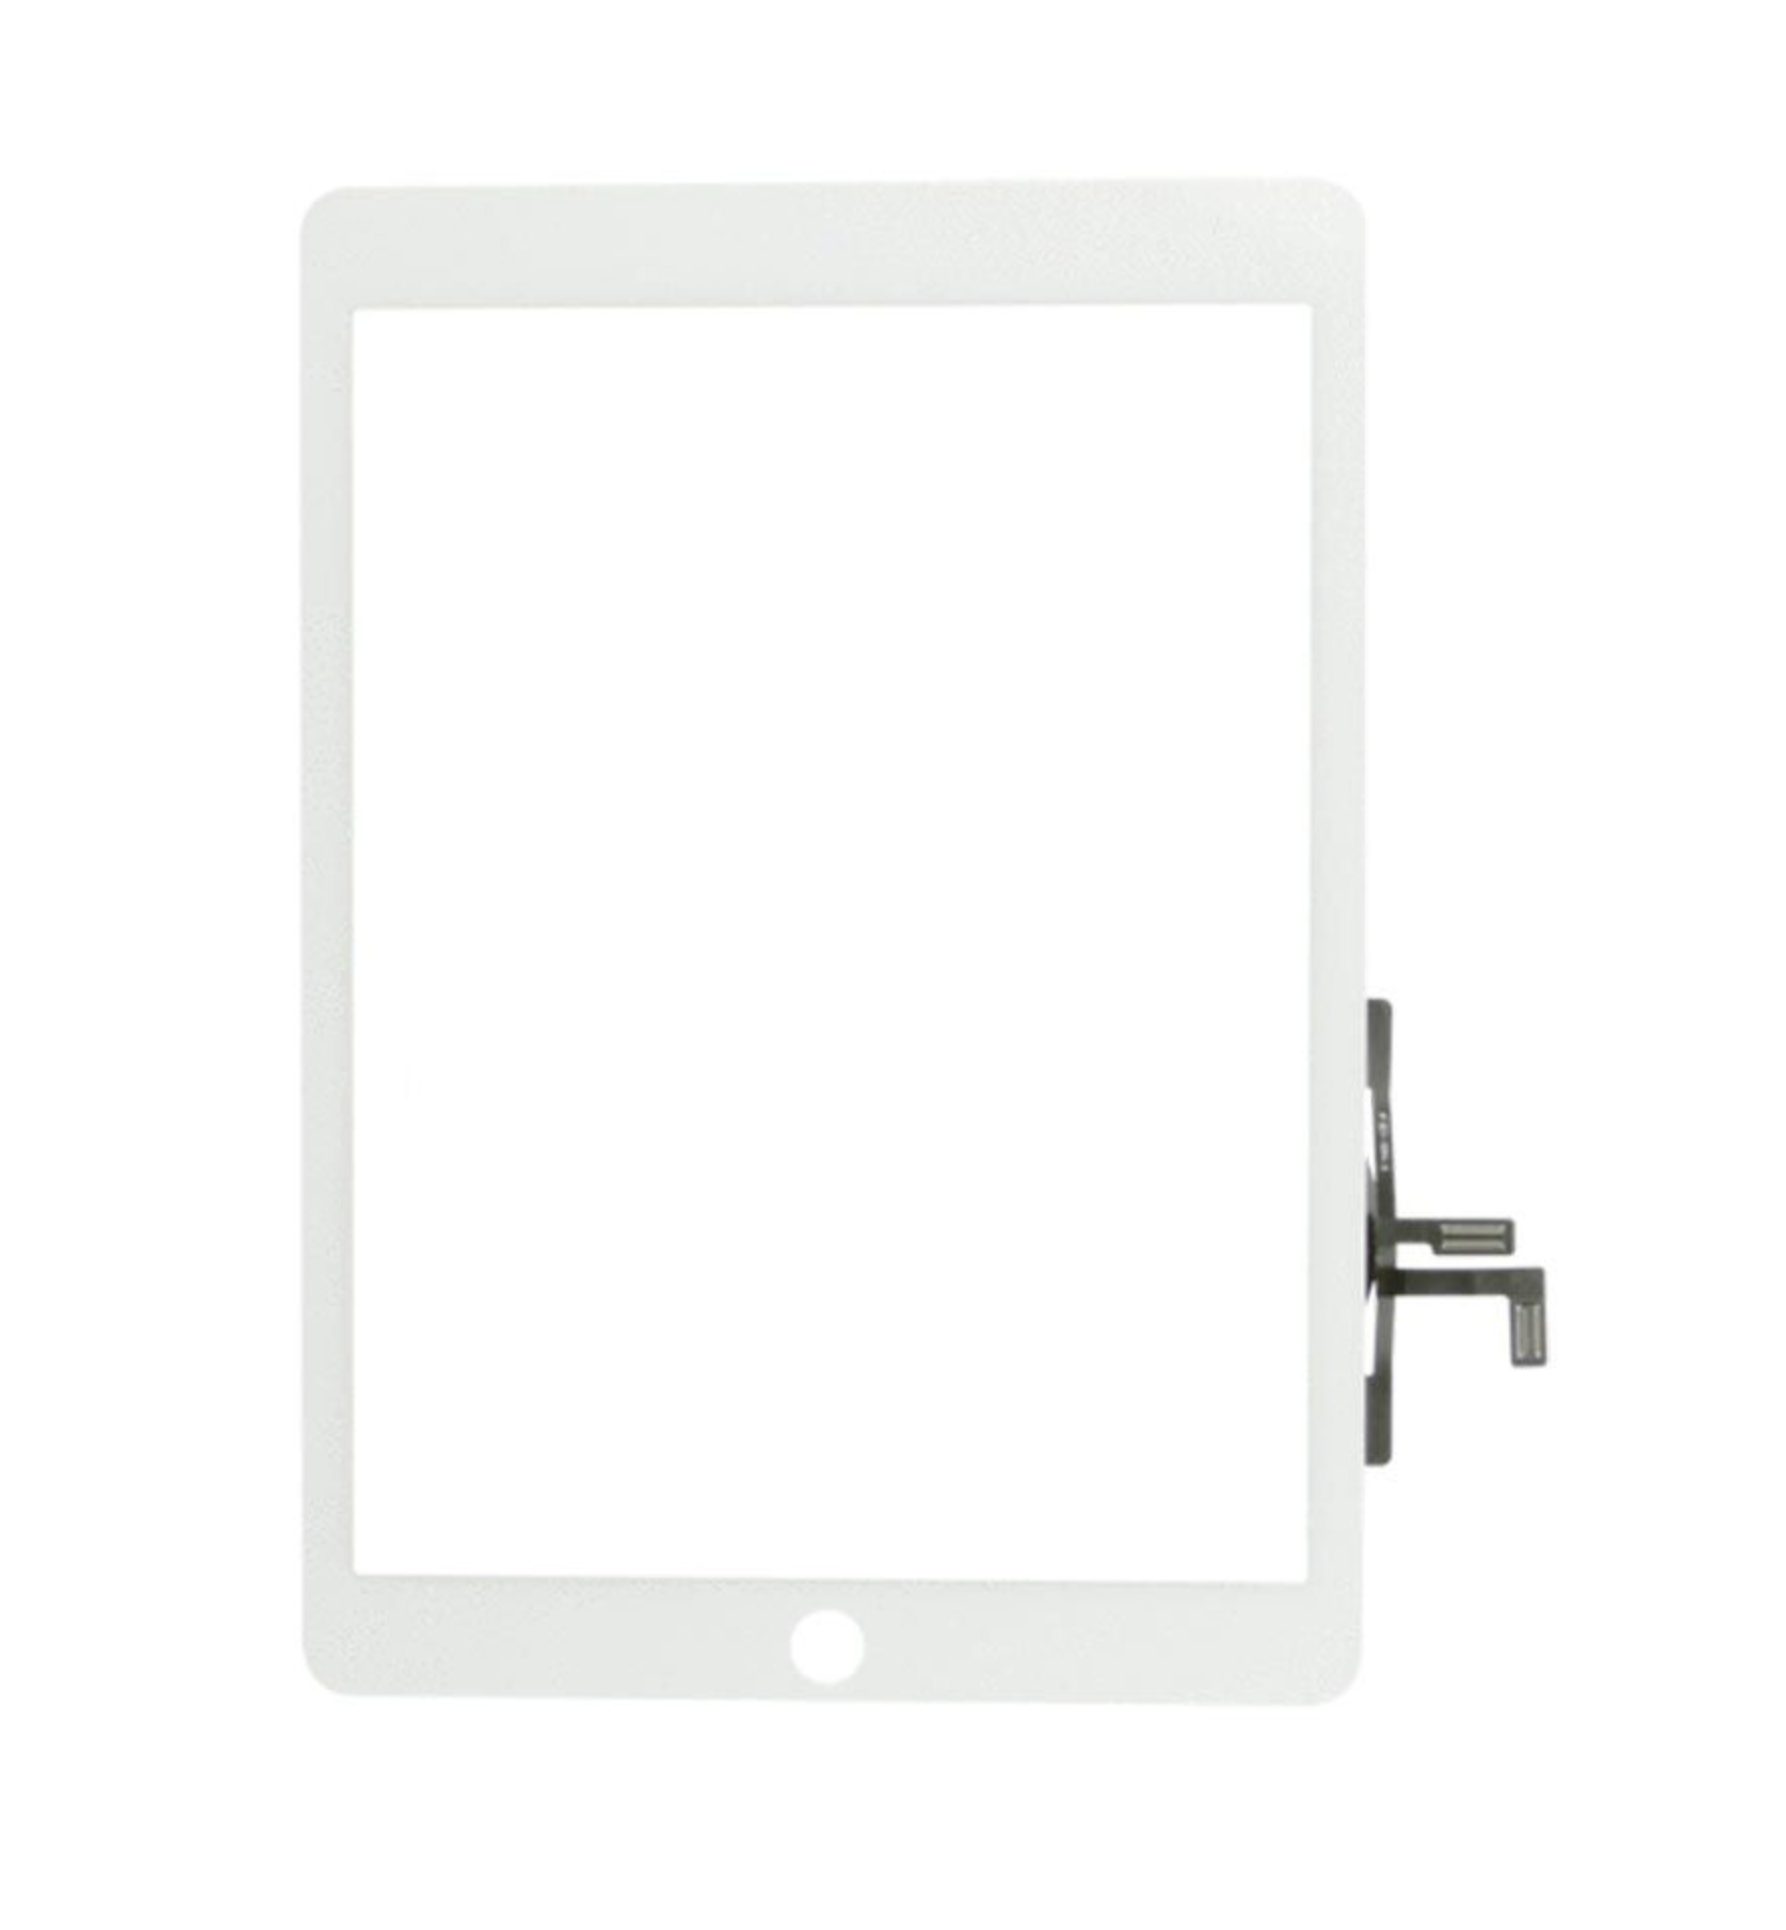 iPad 5 / iPad Air 1 Glass Digitizer Assembly without Home Button (White)